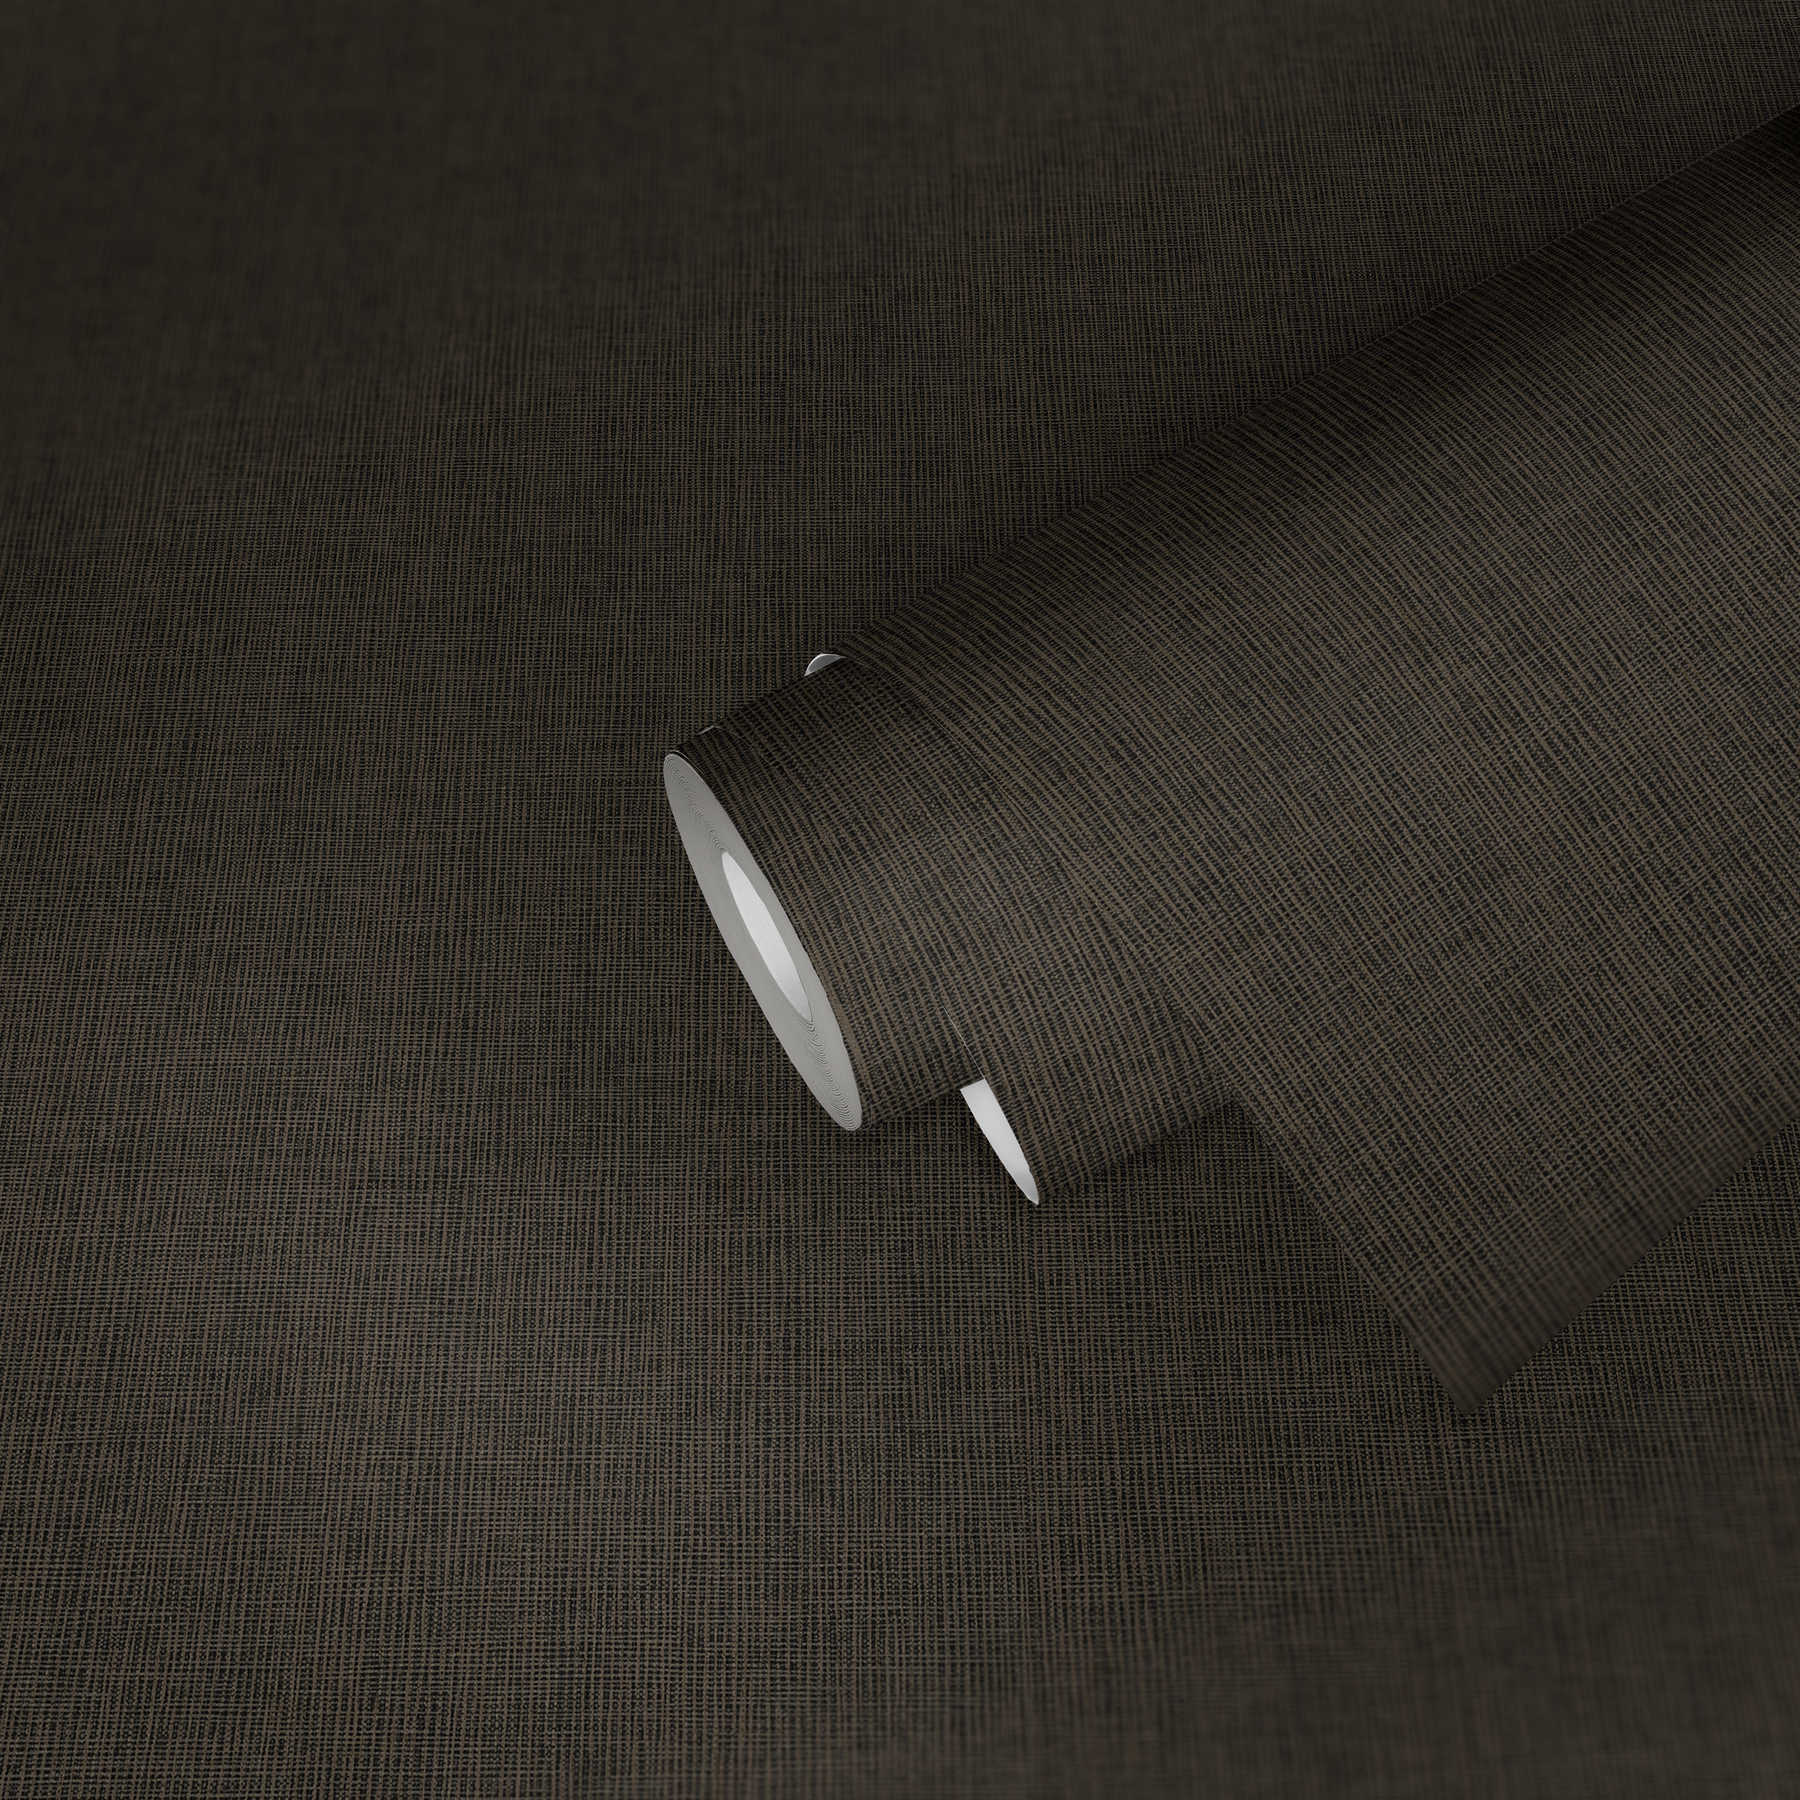             Brown non-woven wallpaper with grey & gold details - blue, grey, silver
        